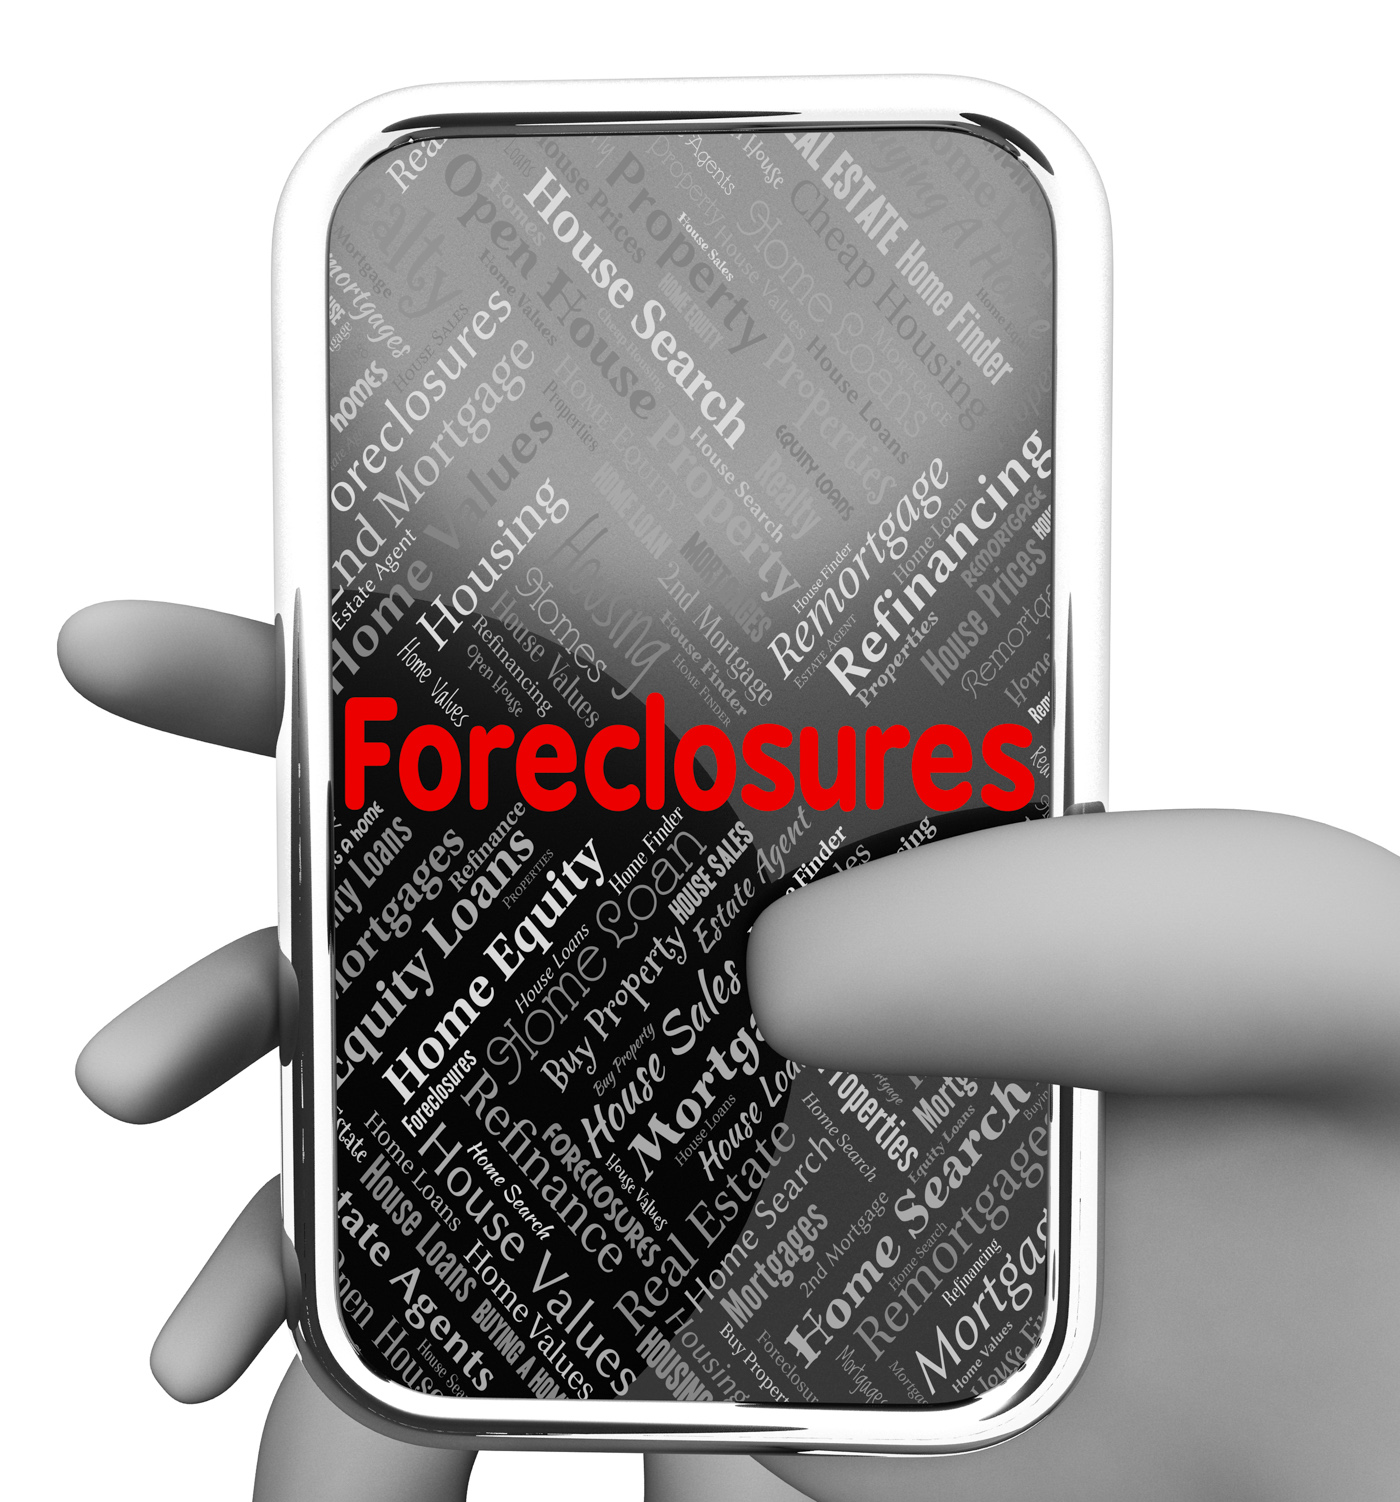 Forclosures Online Means Web Site And Foreclosed, Phones, Website, Web, Smartphone, HQ Photo